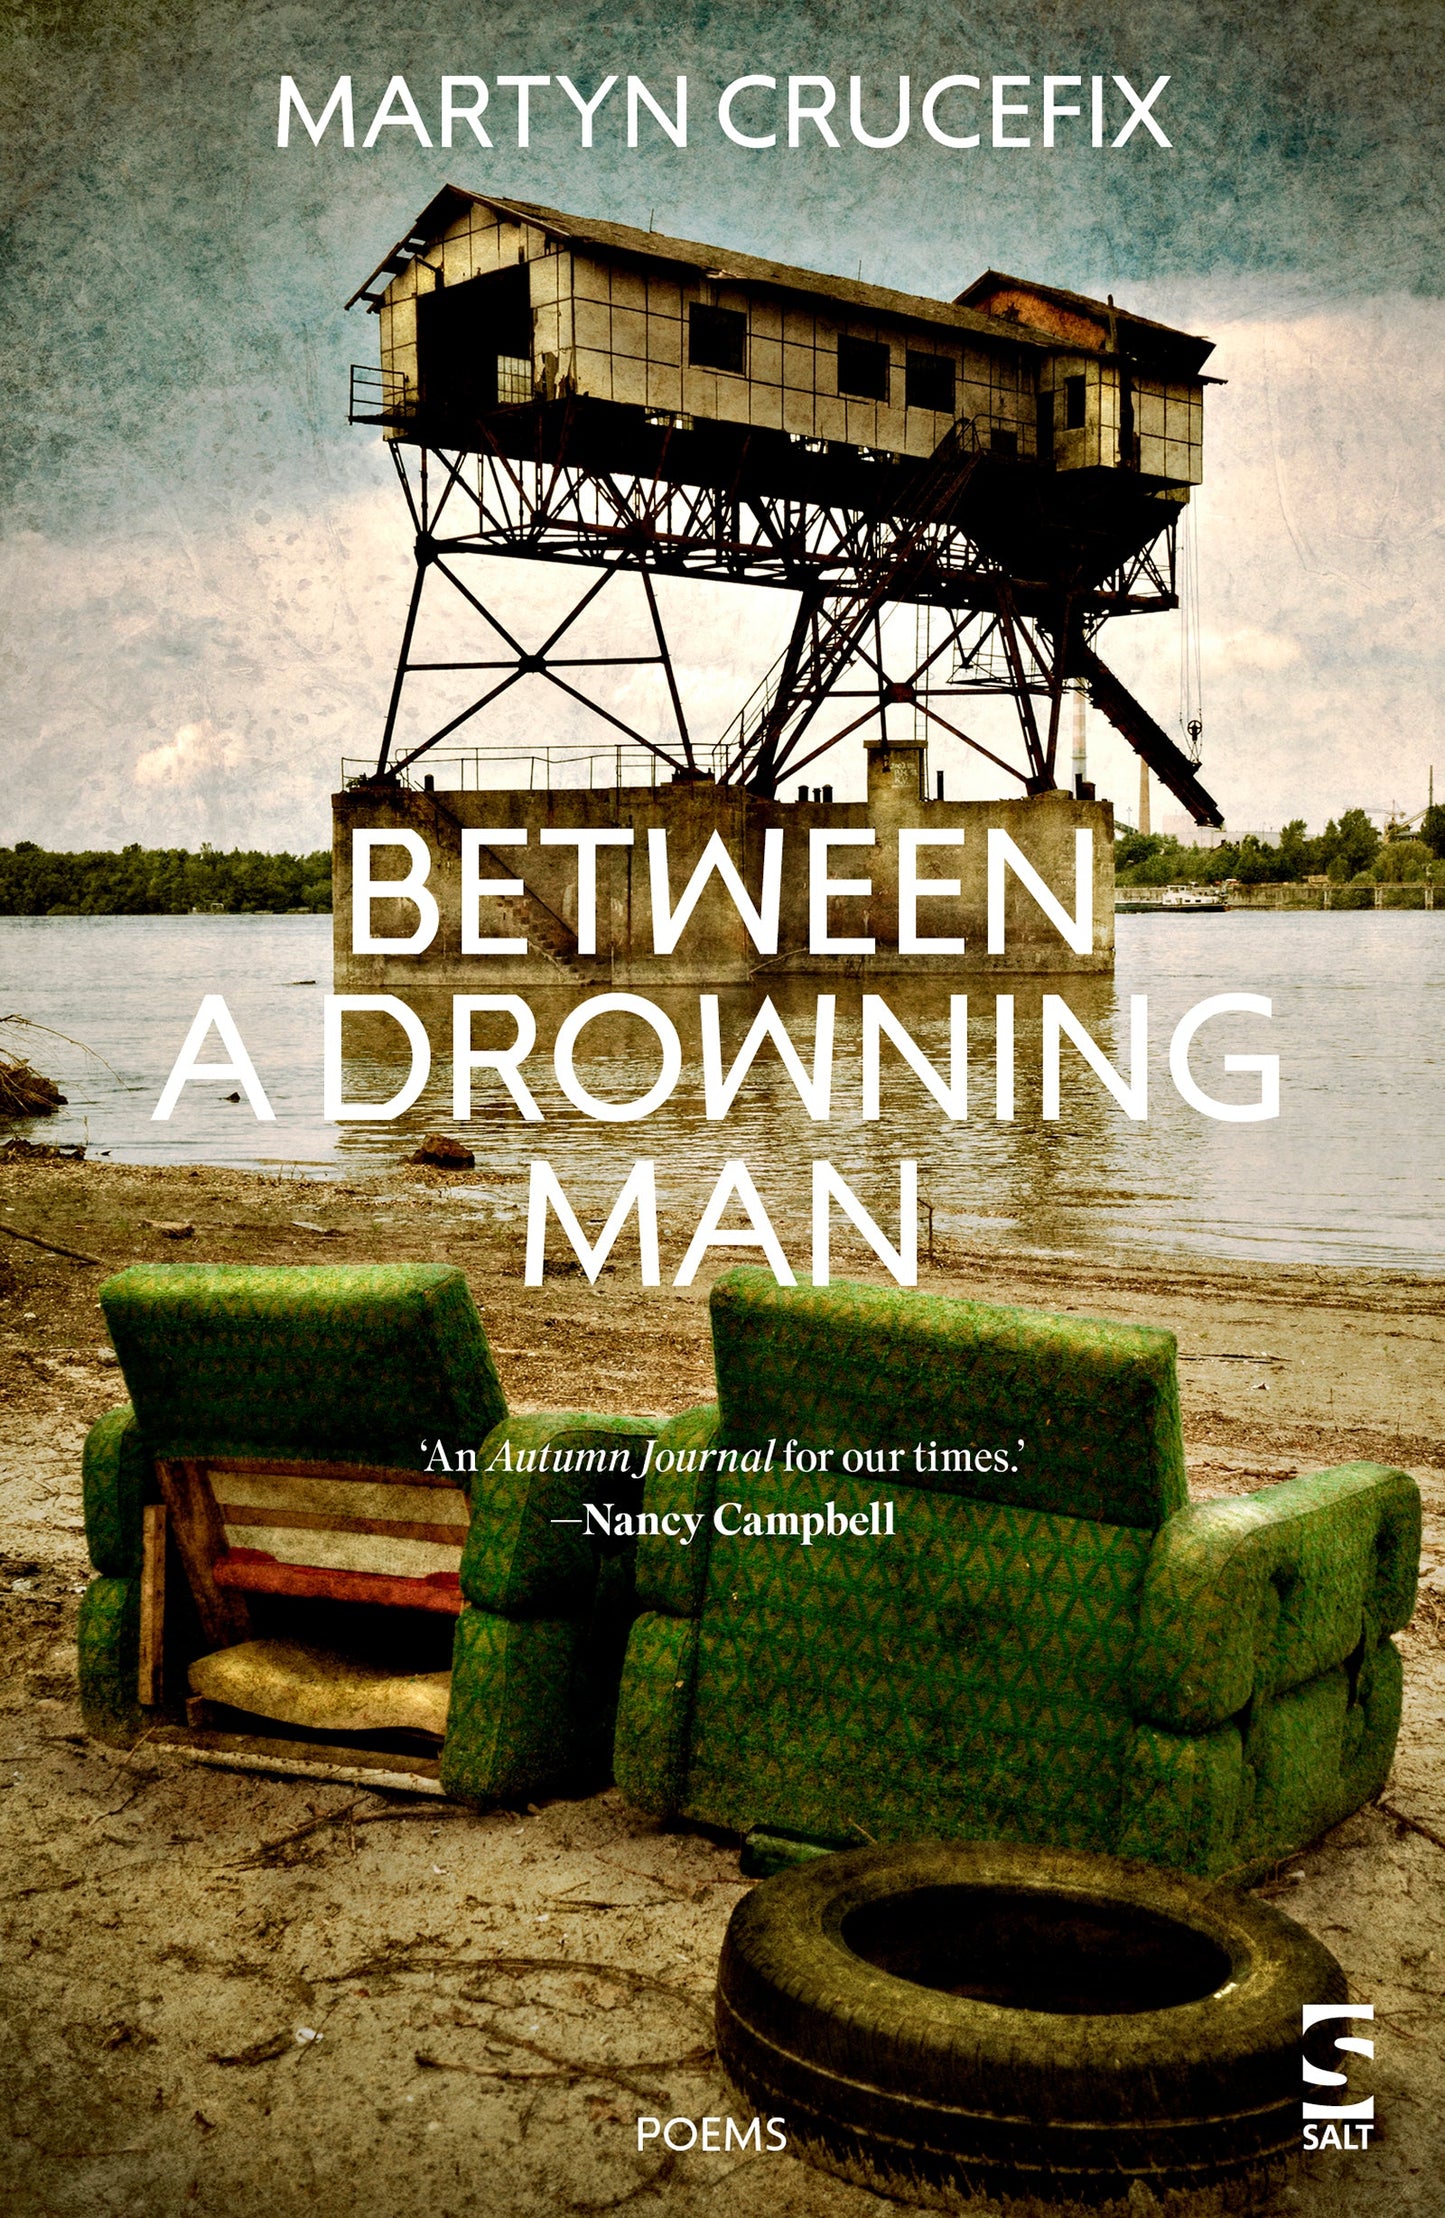 Between a Drowning Man by Martyn Crucefix